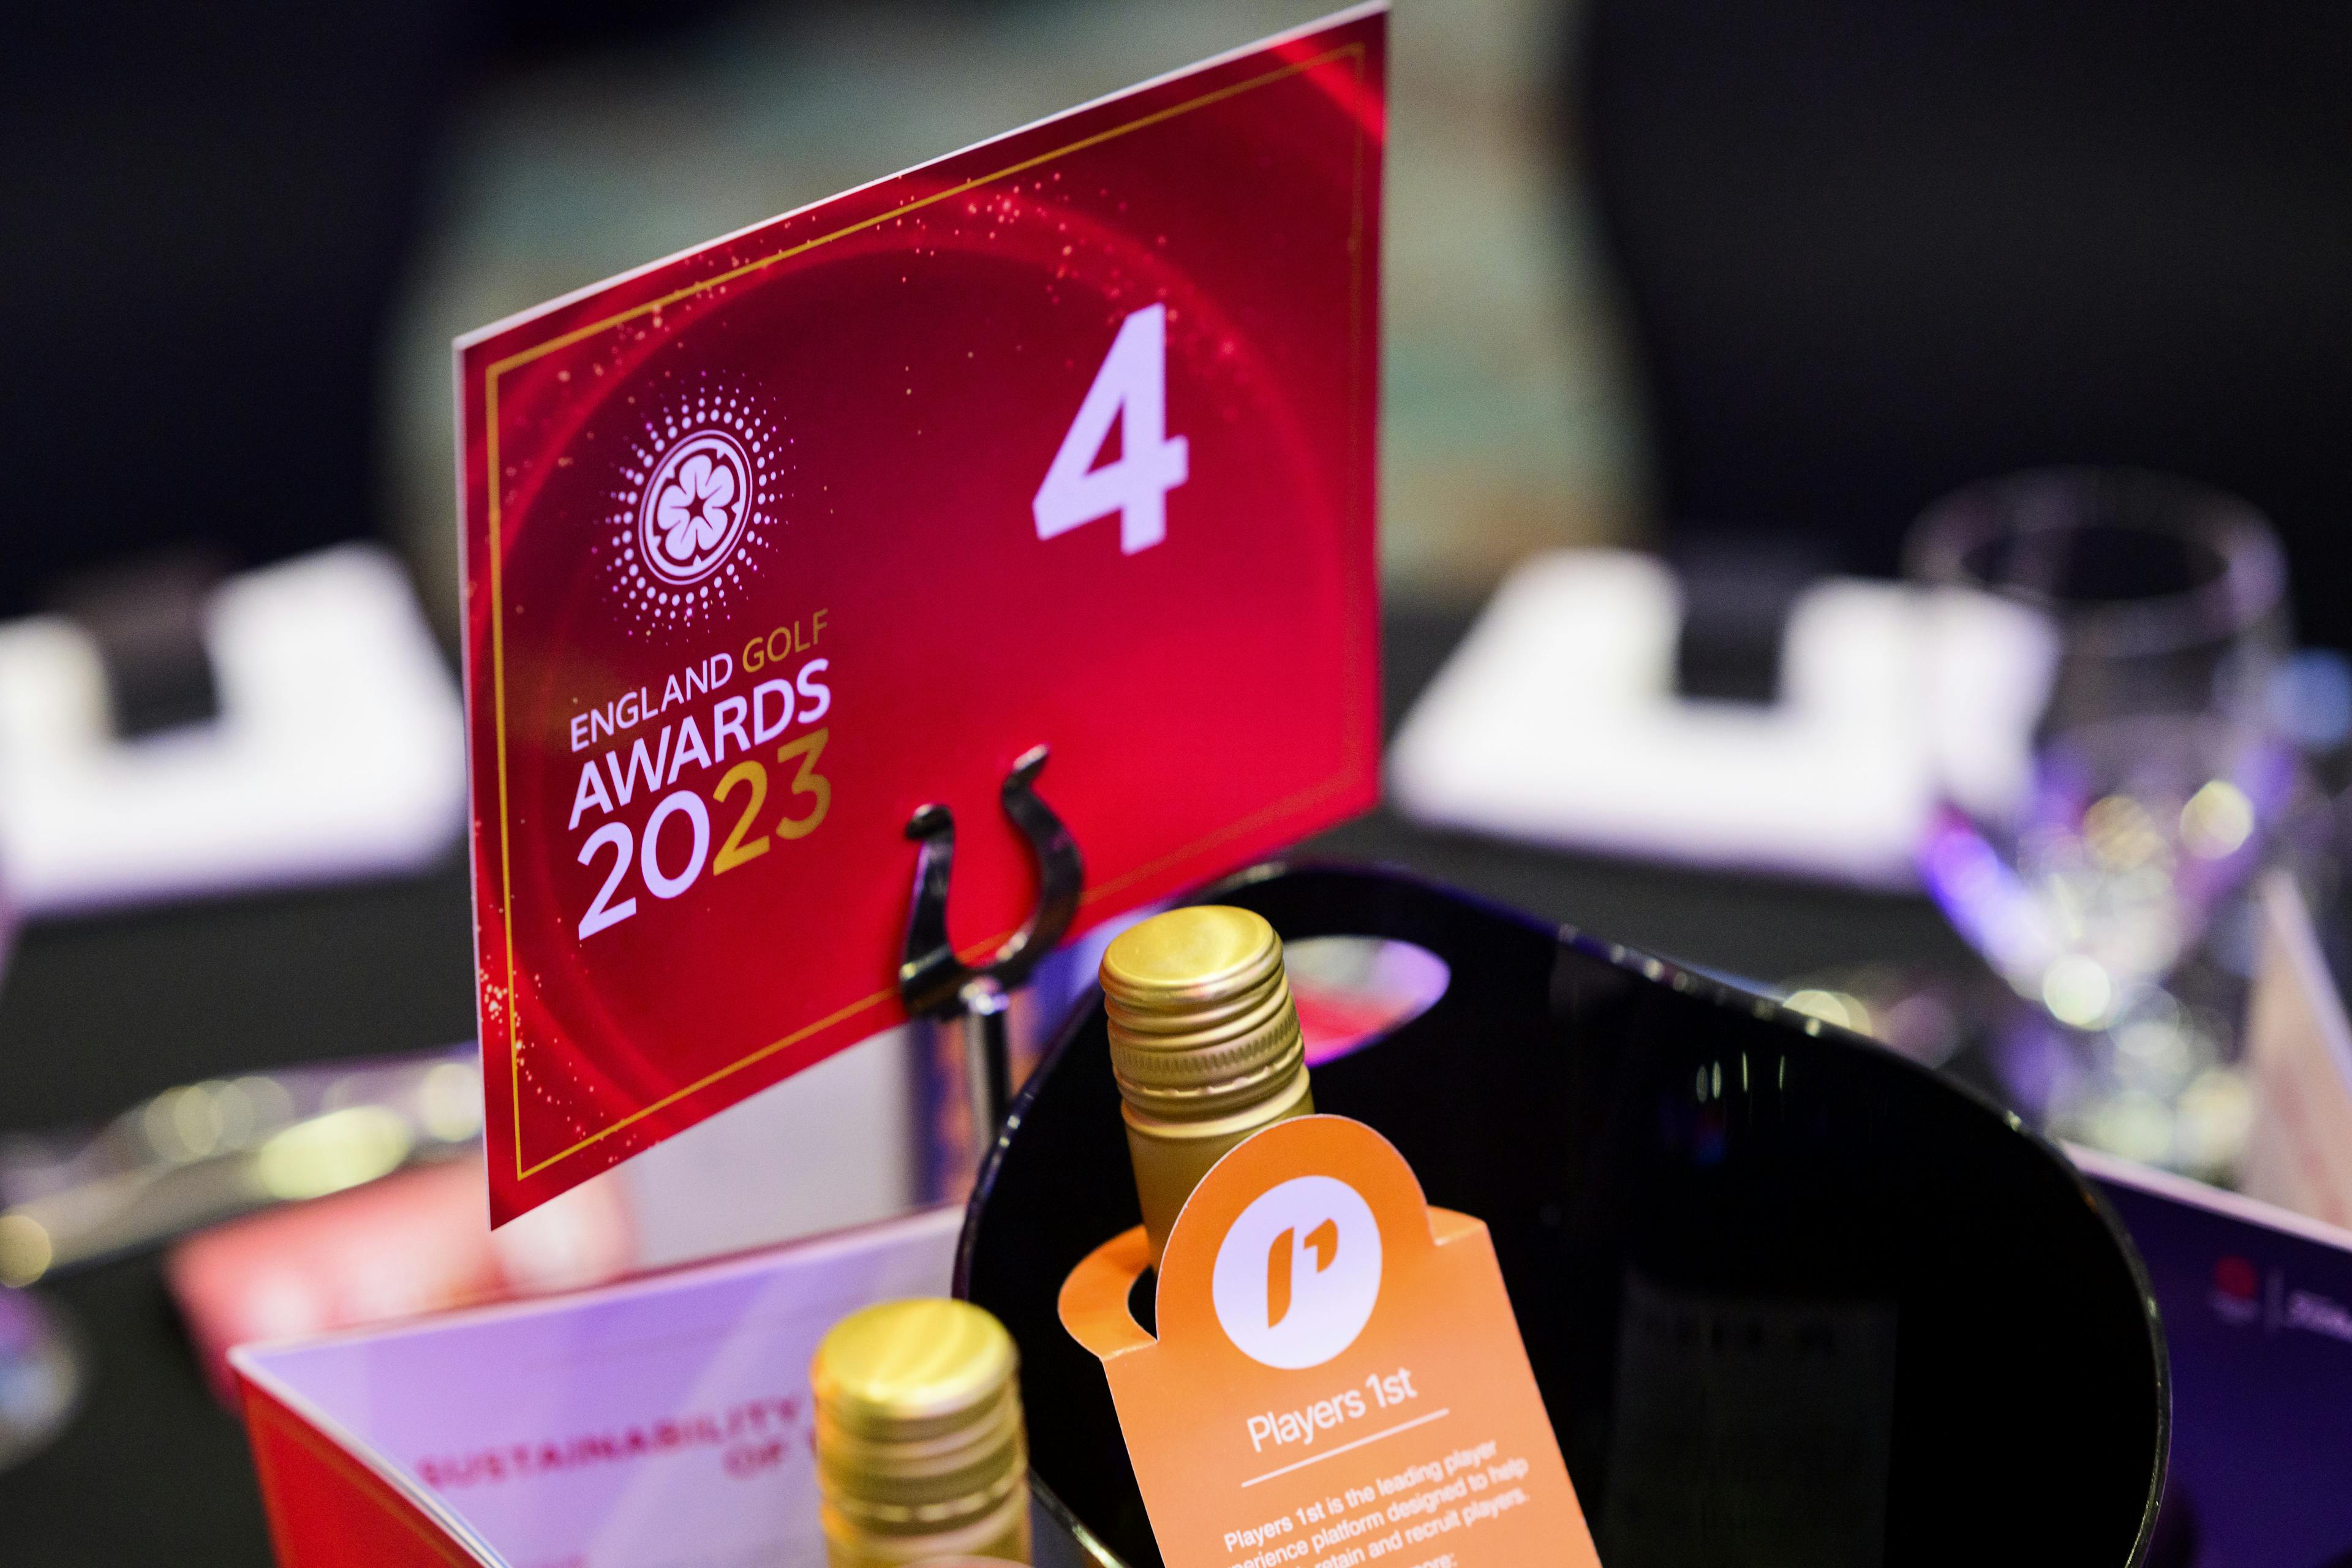 Players 1st sponsored the wine at the England Golf Awards 2023 as a contribution to the event, which the golf member experience management company has supported in various ways since 2018.